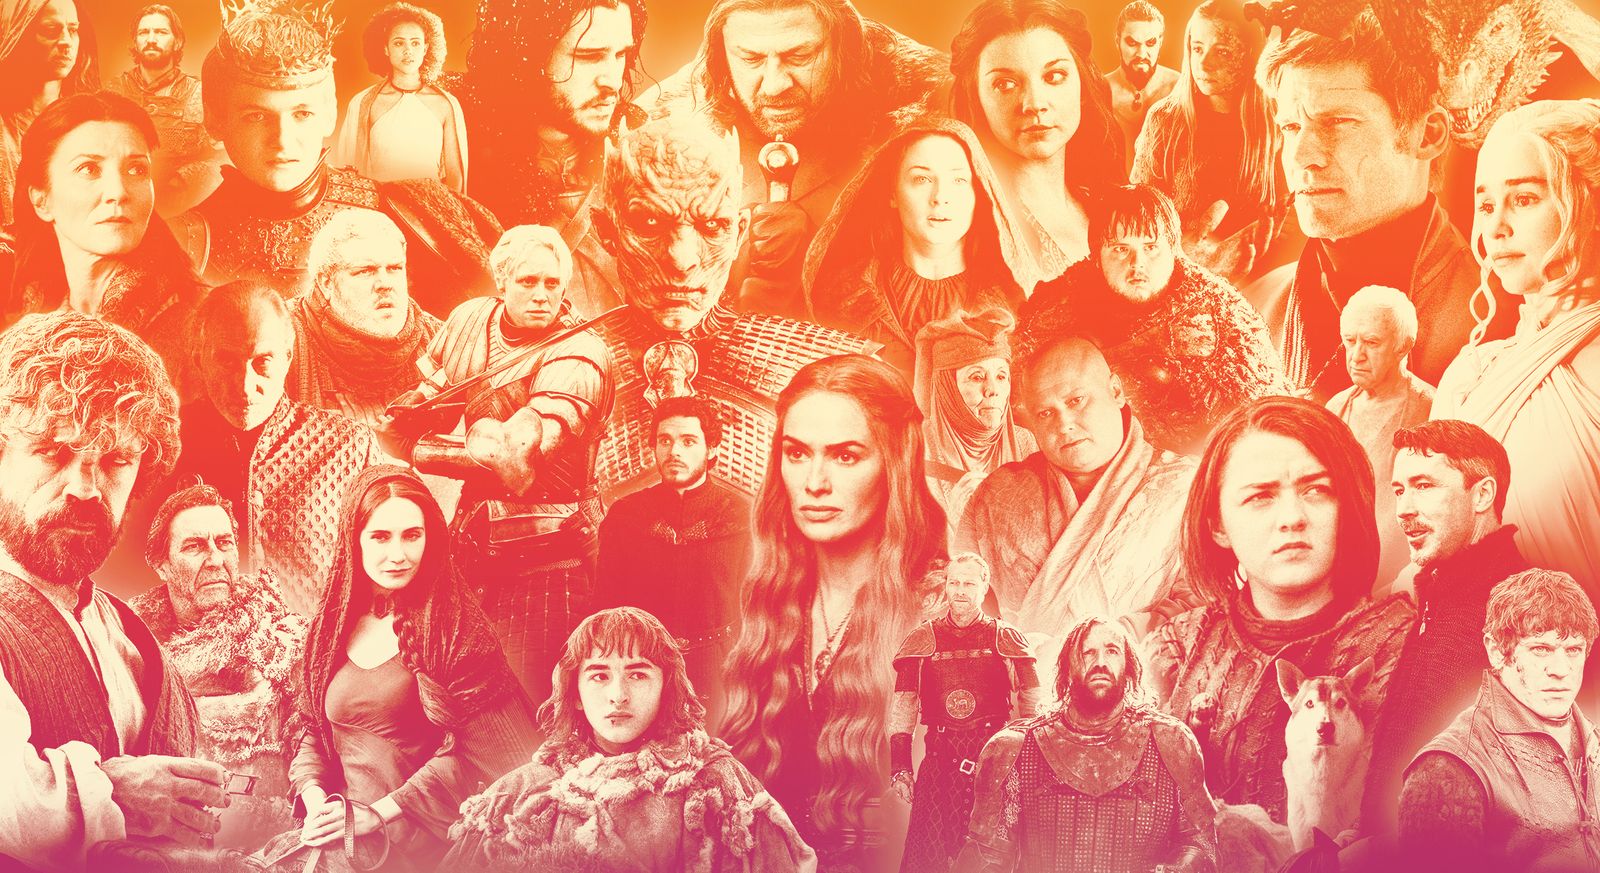 game of thrones character cheat sheet